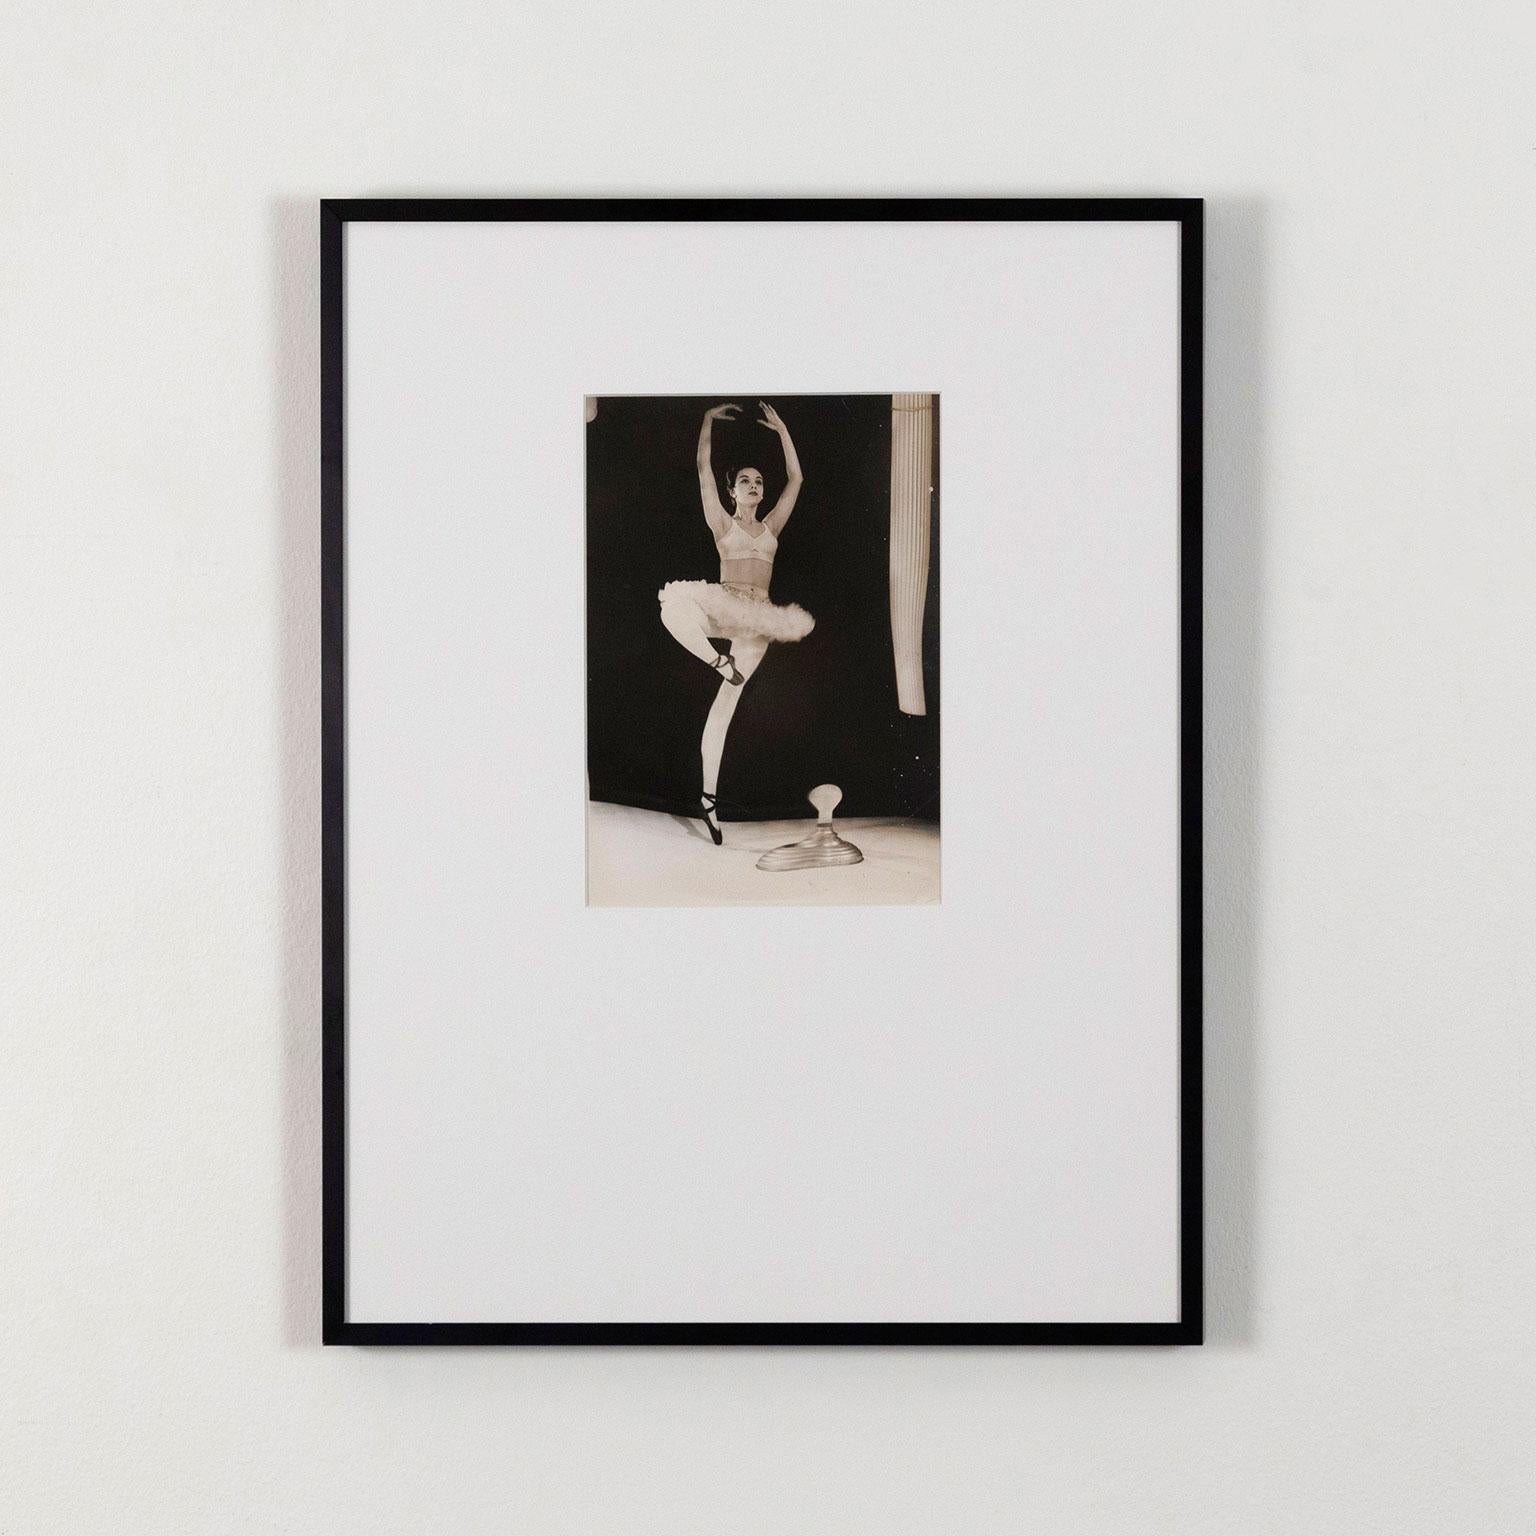 Weegee Black and White Photograph - Ballerina